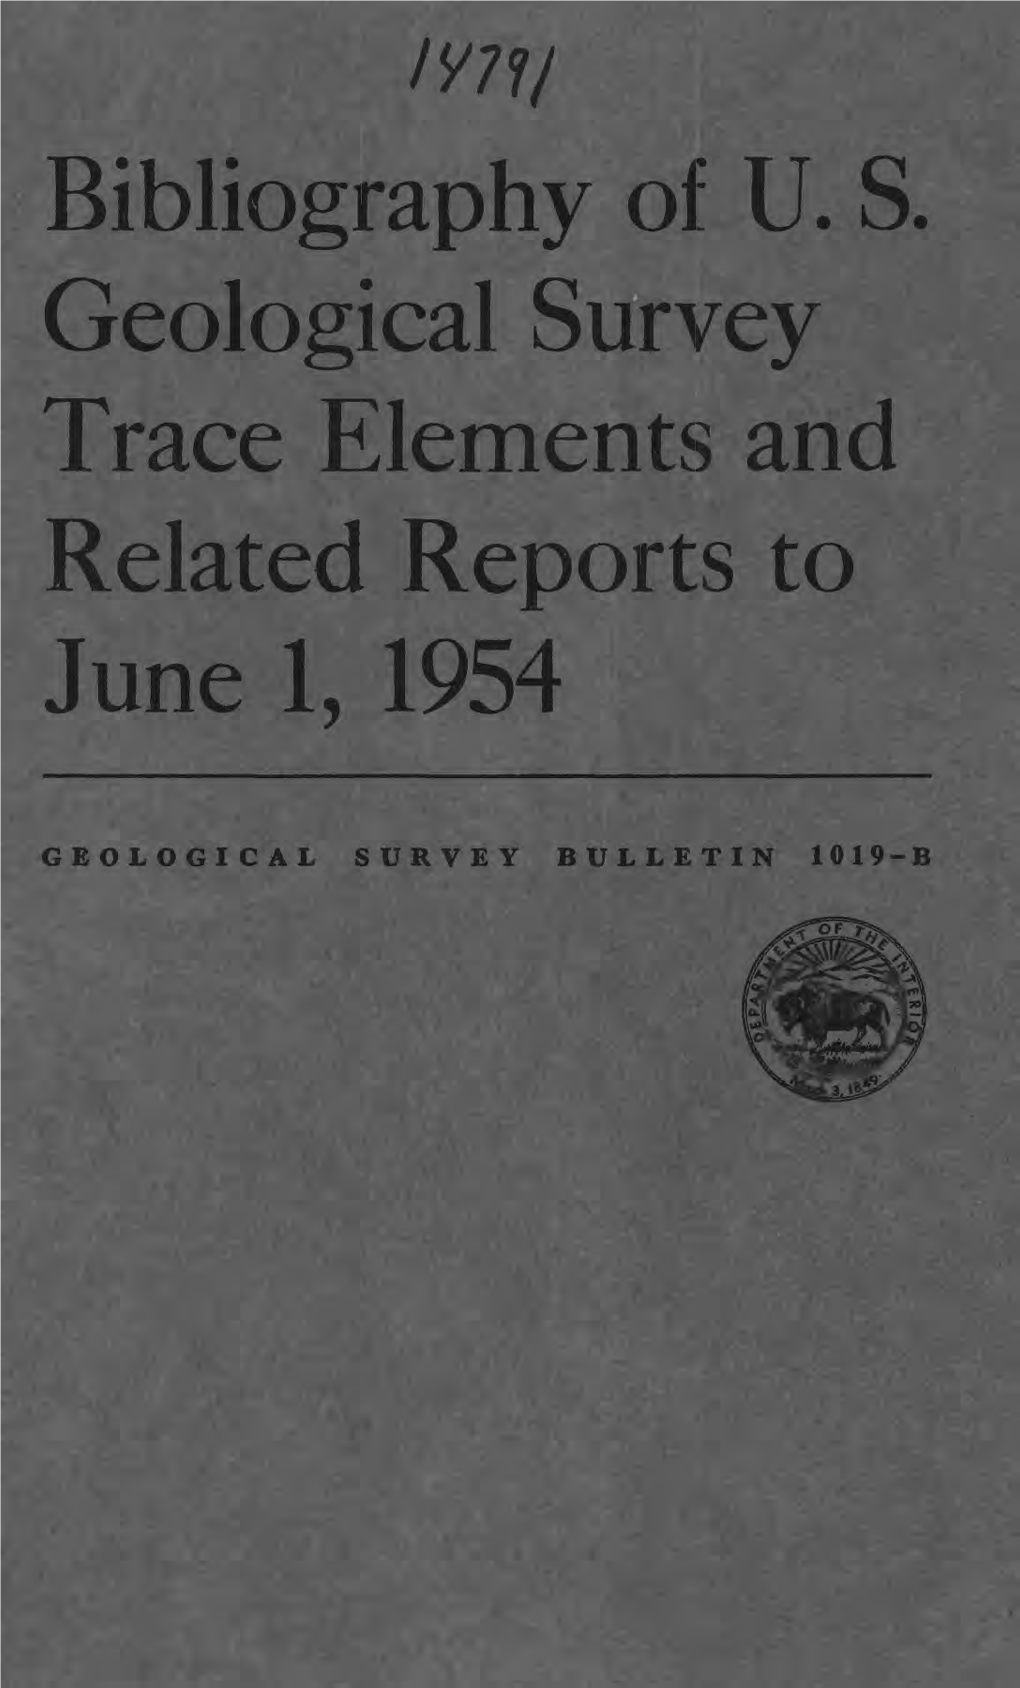 Bibliography of U. S. Geological Survey Trace Elements and Related Reports to June 1, 1954